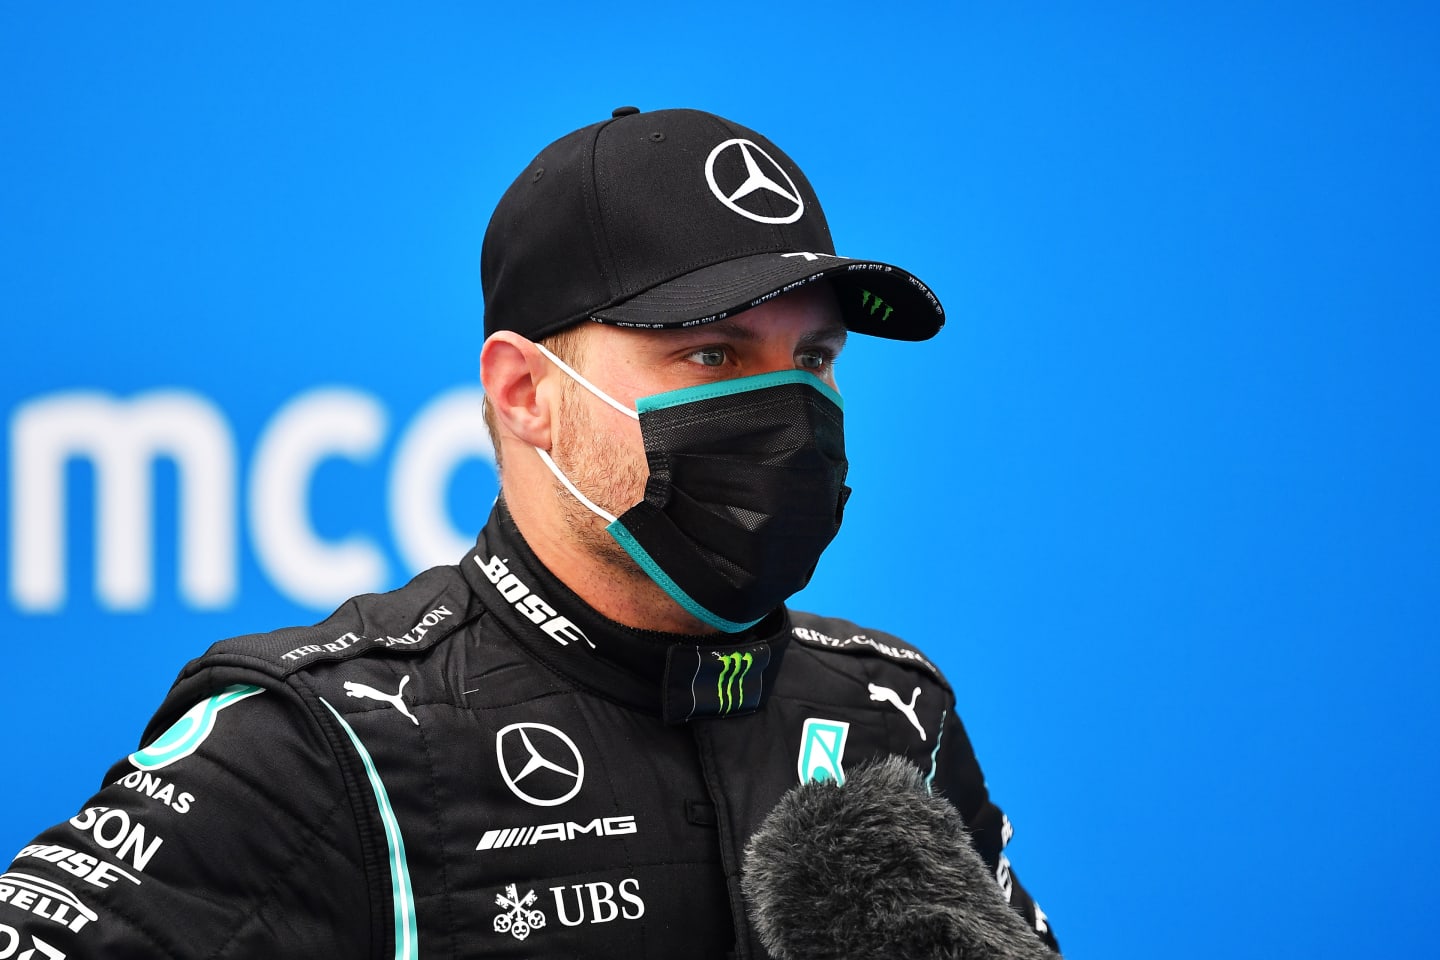 BUDAPEST, HUNGARY - JULY 19: Third placed Valtteri Bottas of Finland and Mercedes GP is interviewed in parc ferme after the Formula One Grand Prix of Hungary at Hungaroring on July 19, 2020 in Budapest, Hungary. (Photo by Joe Klamar/Pool via Getty Images)